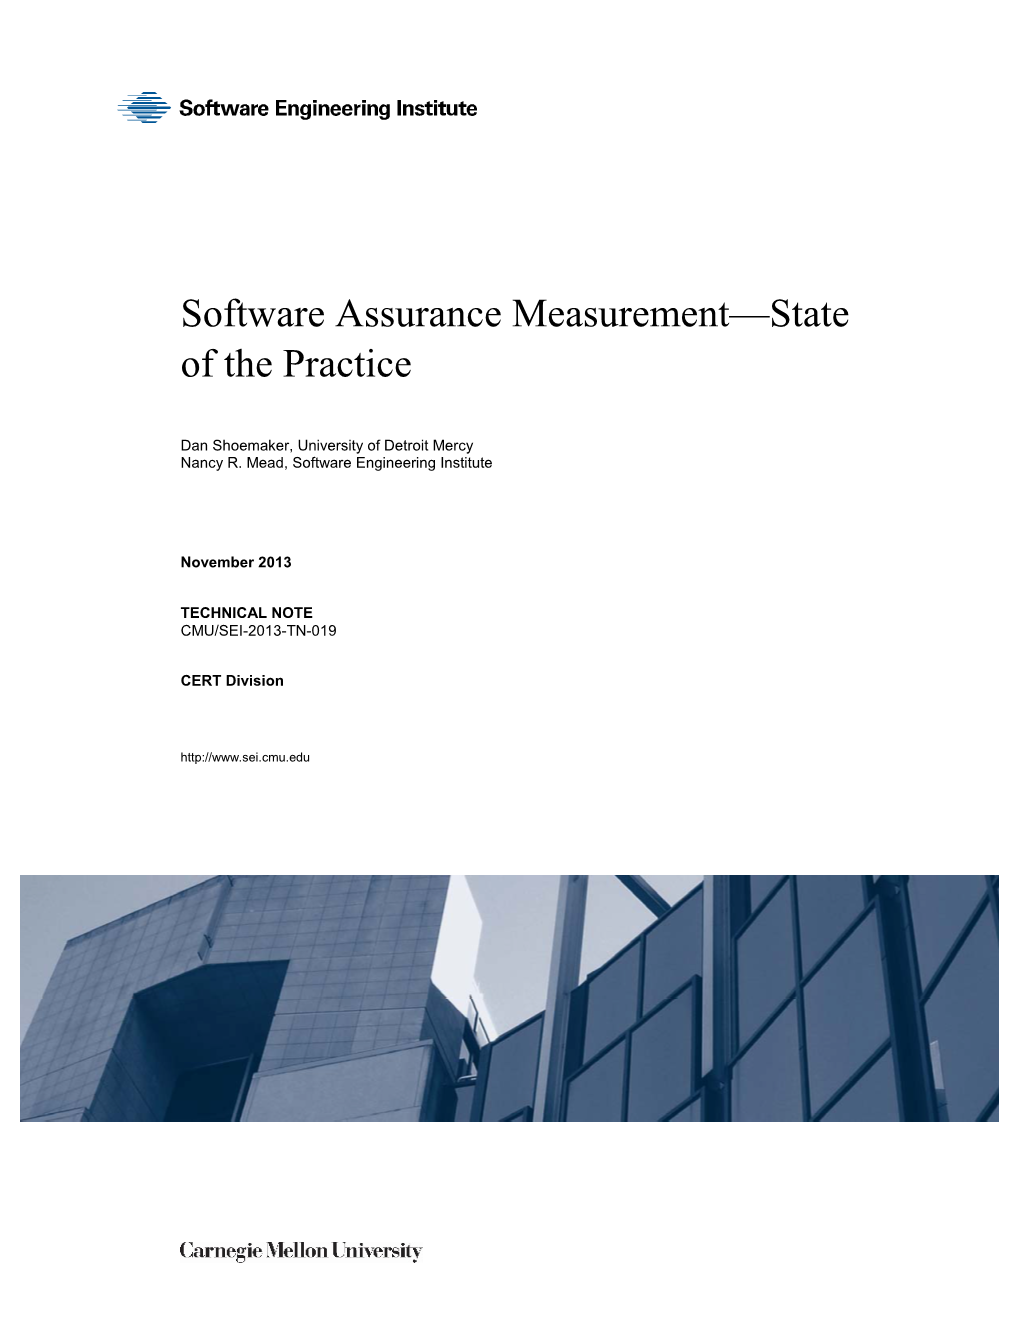 Software Assurance Measurement—State of the Practice